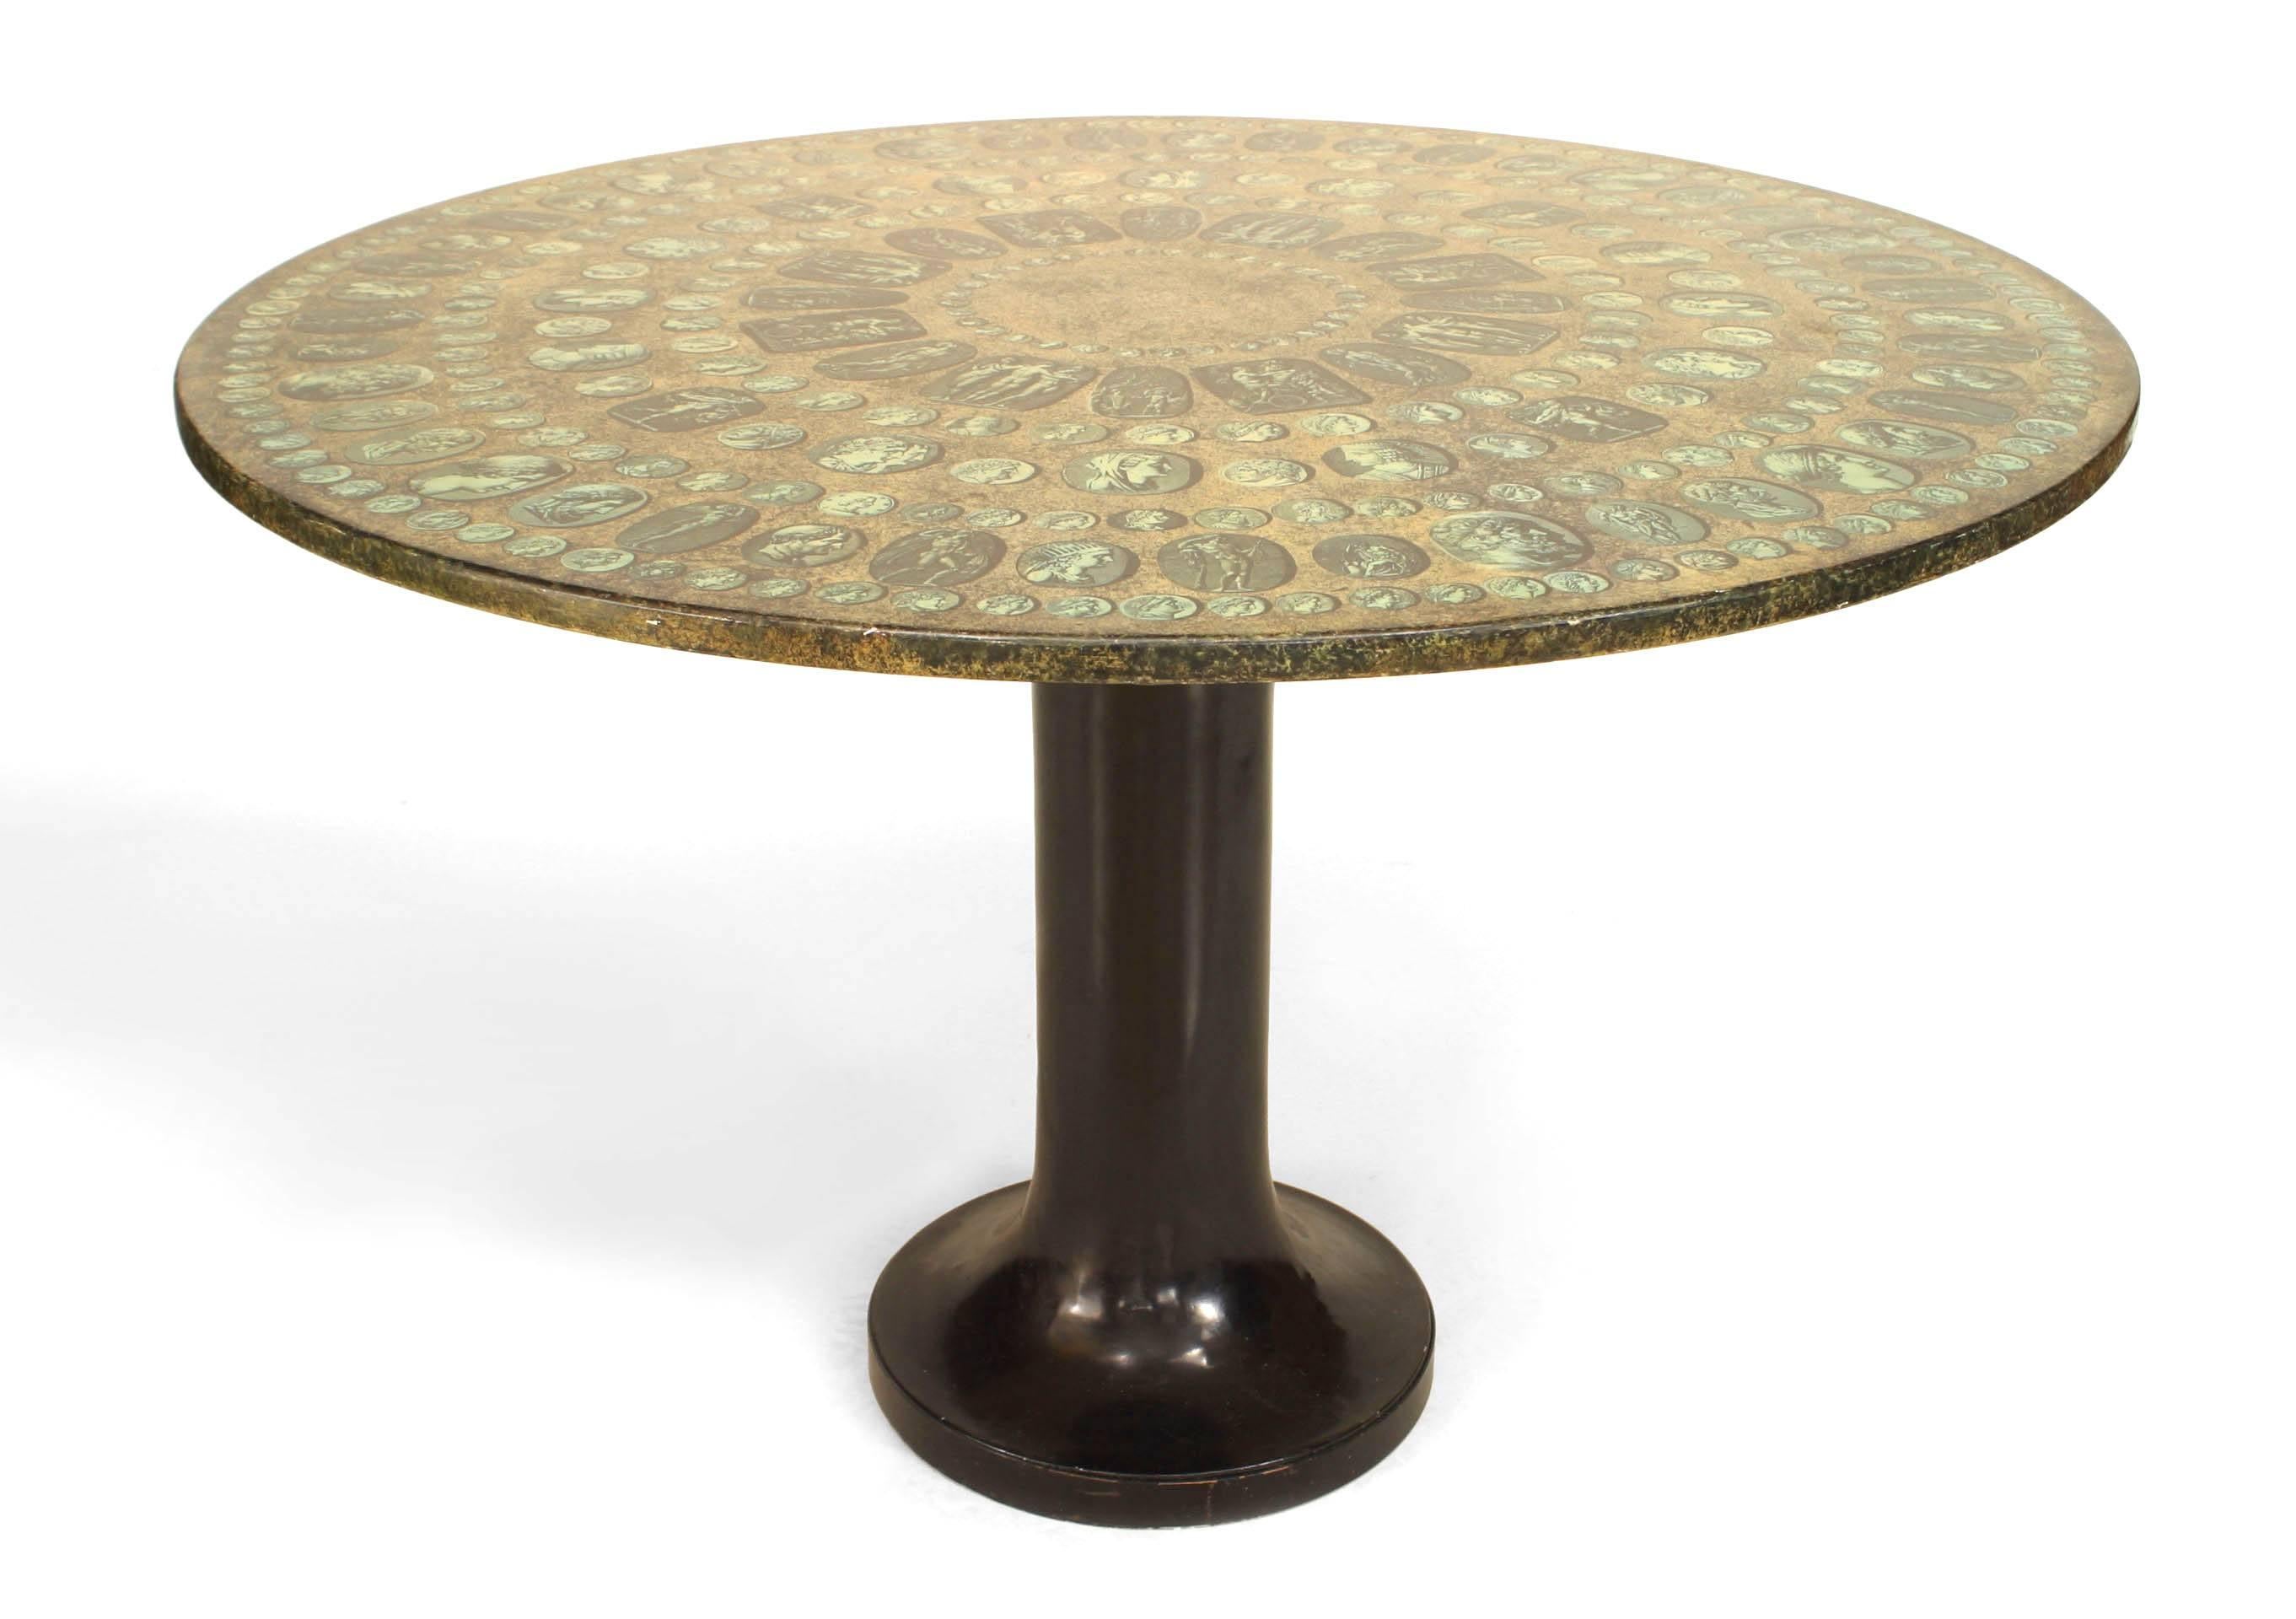 Italian 1950s center/dining table with an ebonized metal pedestal base supporting a painted & transfer decorated top with medallions of Roman Caesars. (FORNASETTI)
